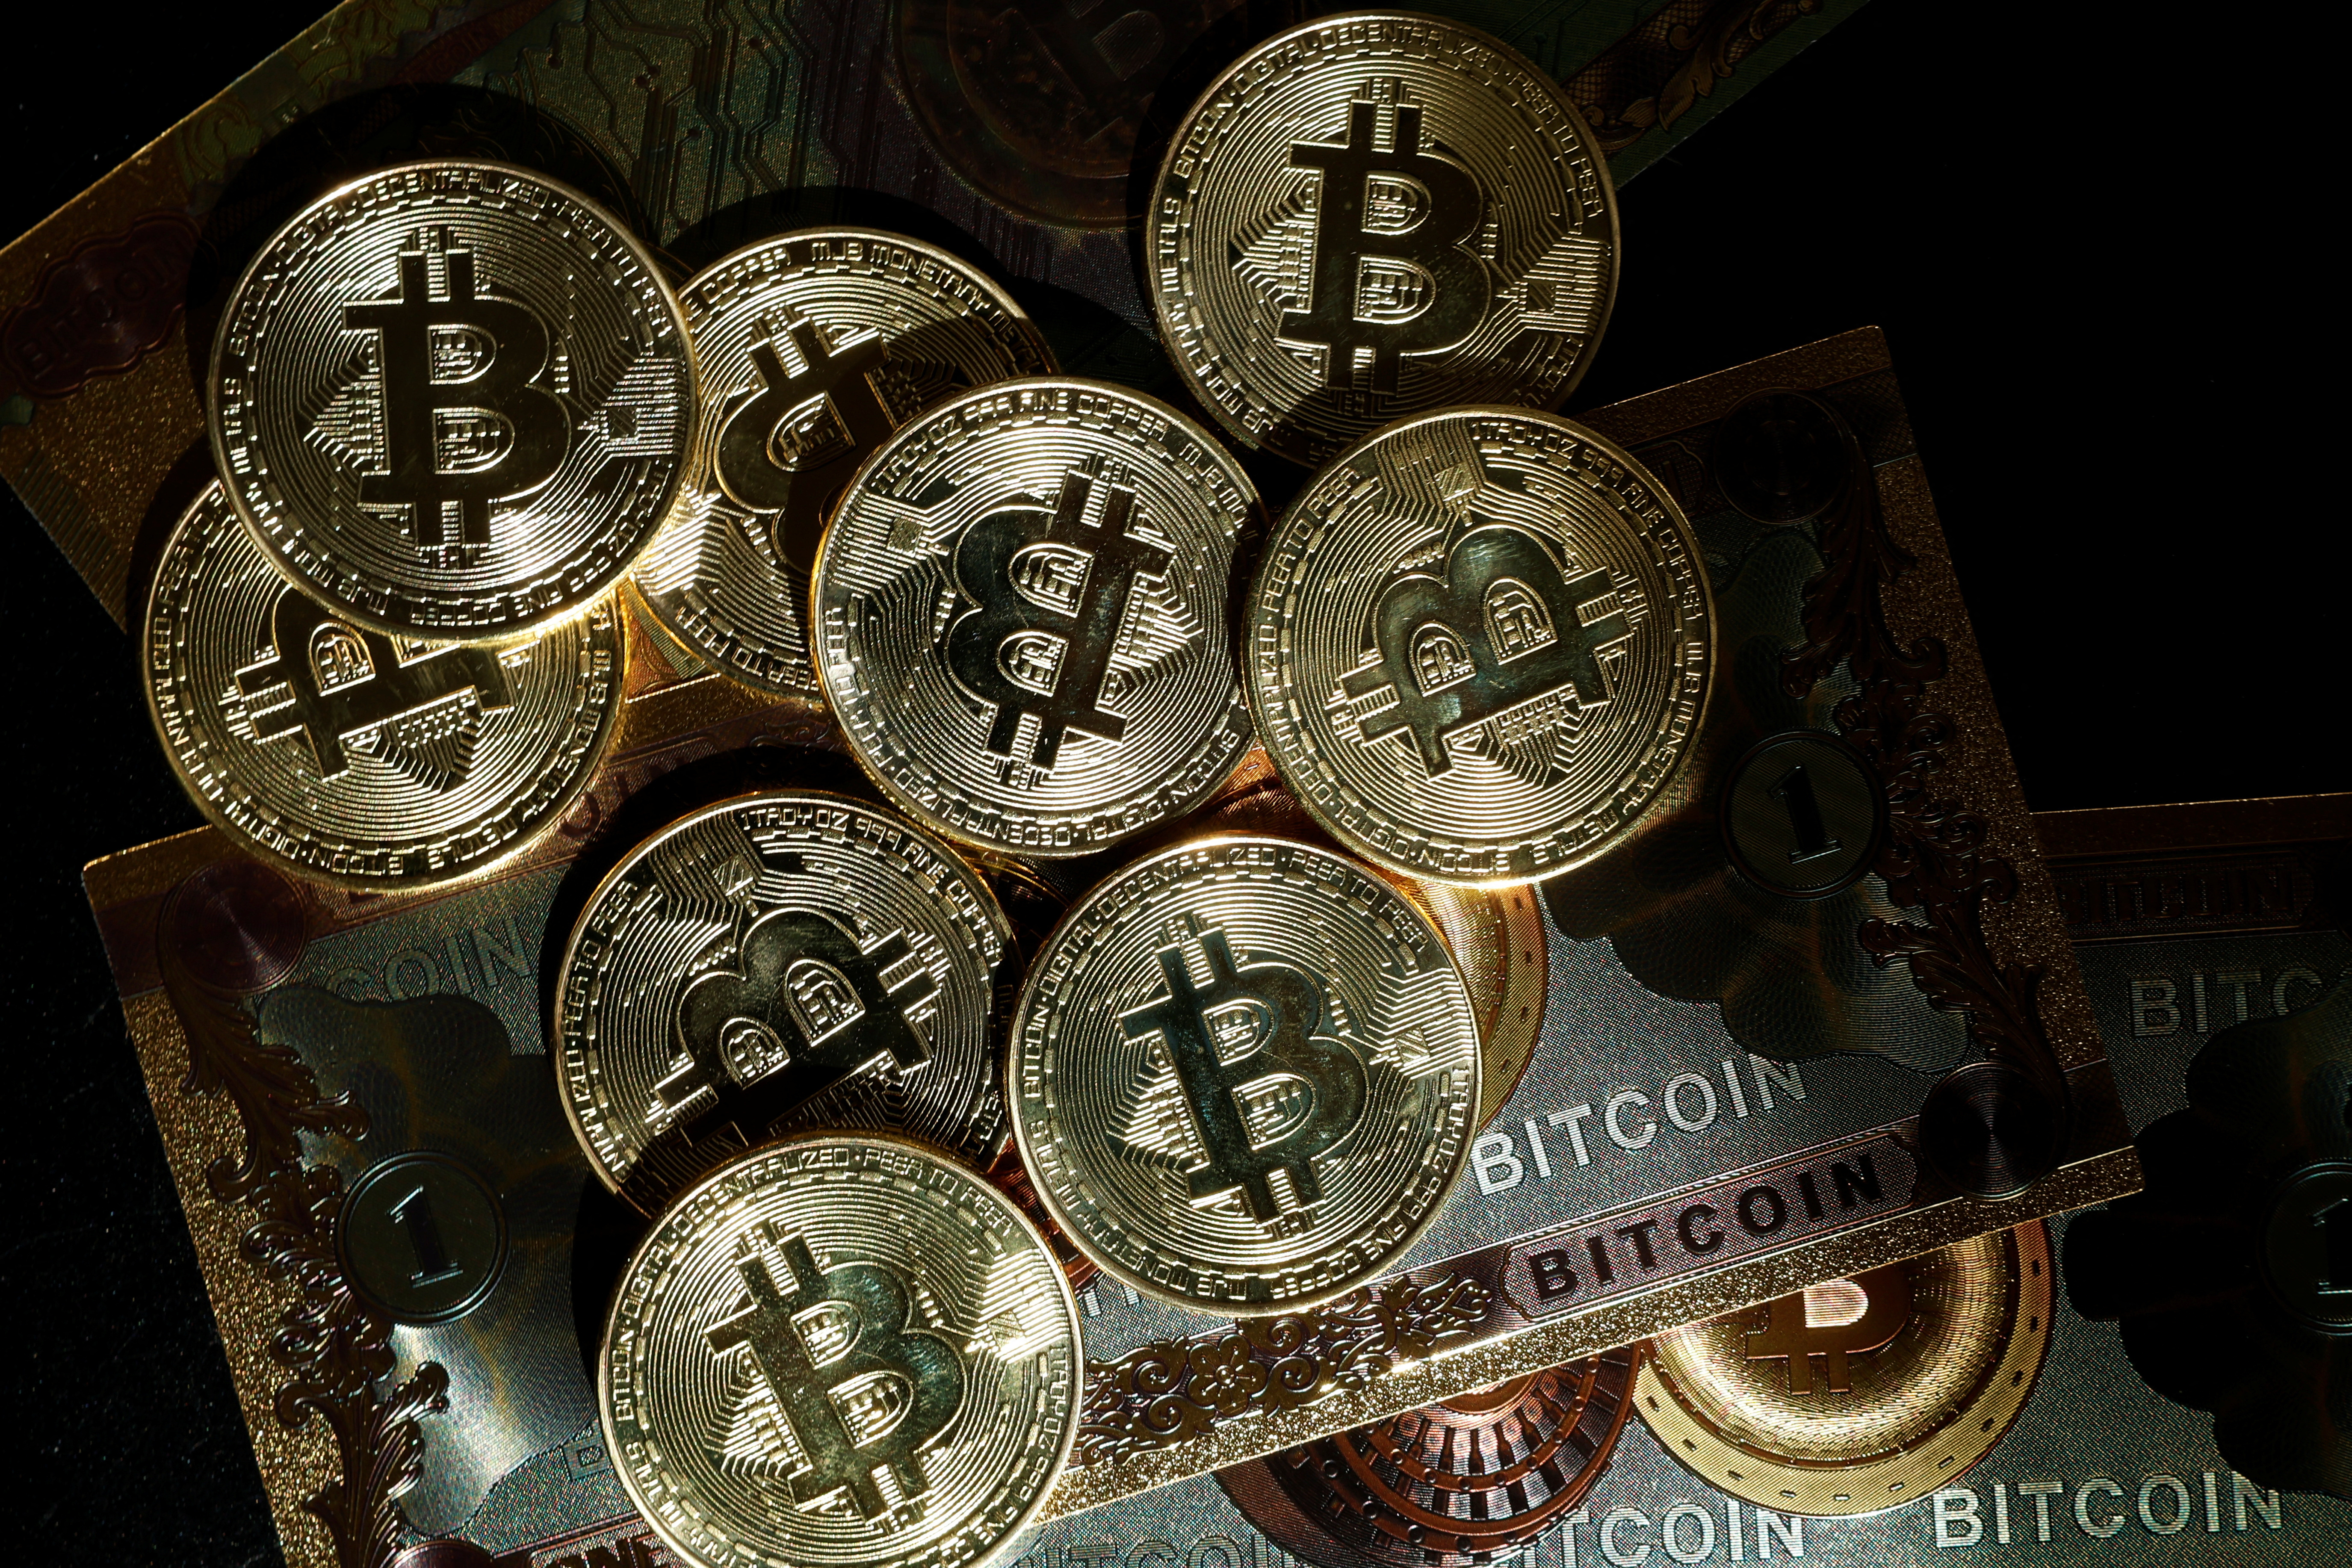 Illustration shows representations of cryptocurrency Bitcoin